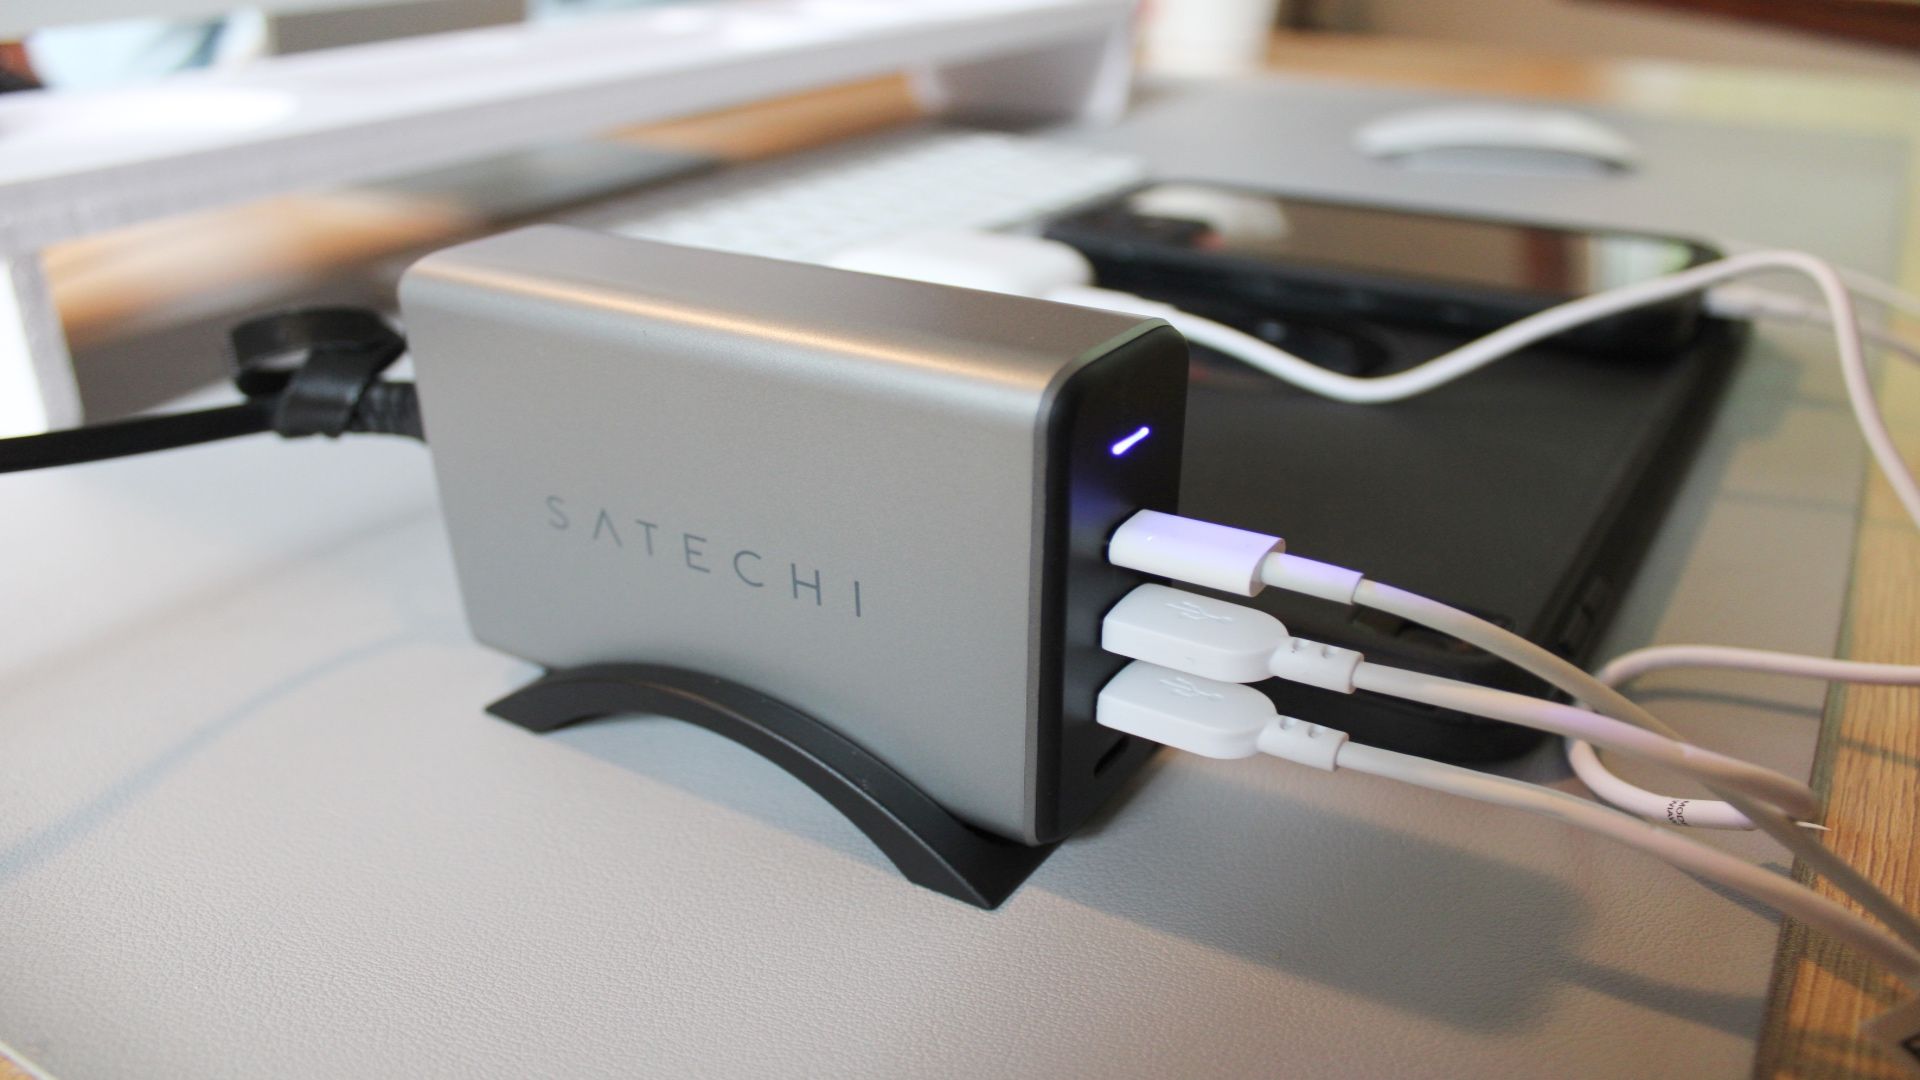 Satechi 165W USB-C 4-Port PD GaN Charger Review: Small, But Mighty